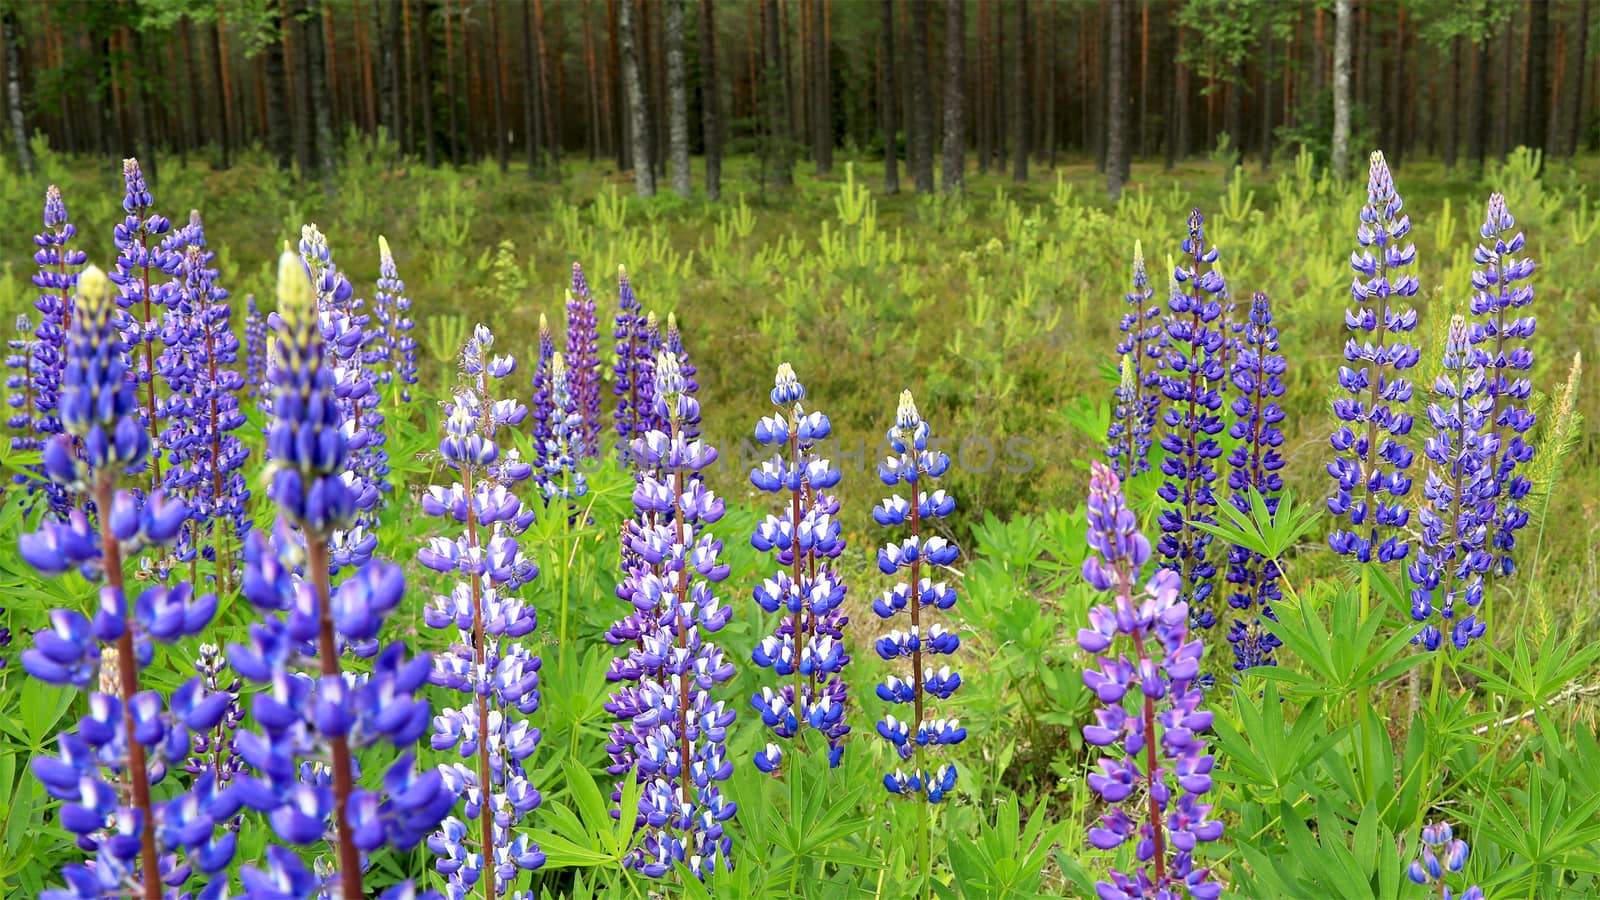 Purple, wild Lupins (Lupinus polyphyllus) flowering by green pine forest in Finland.